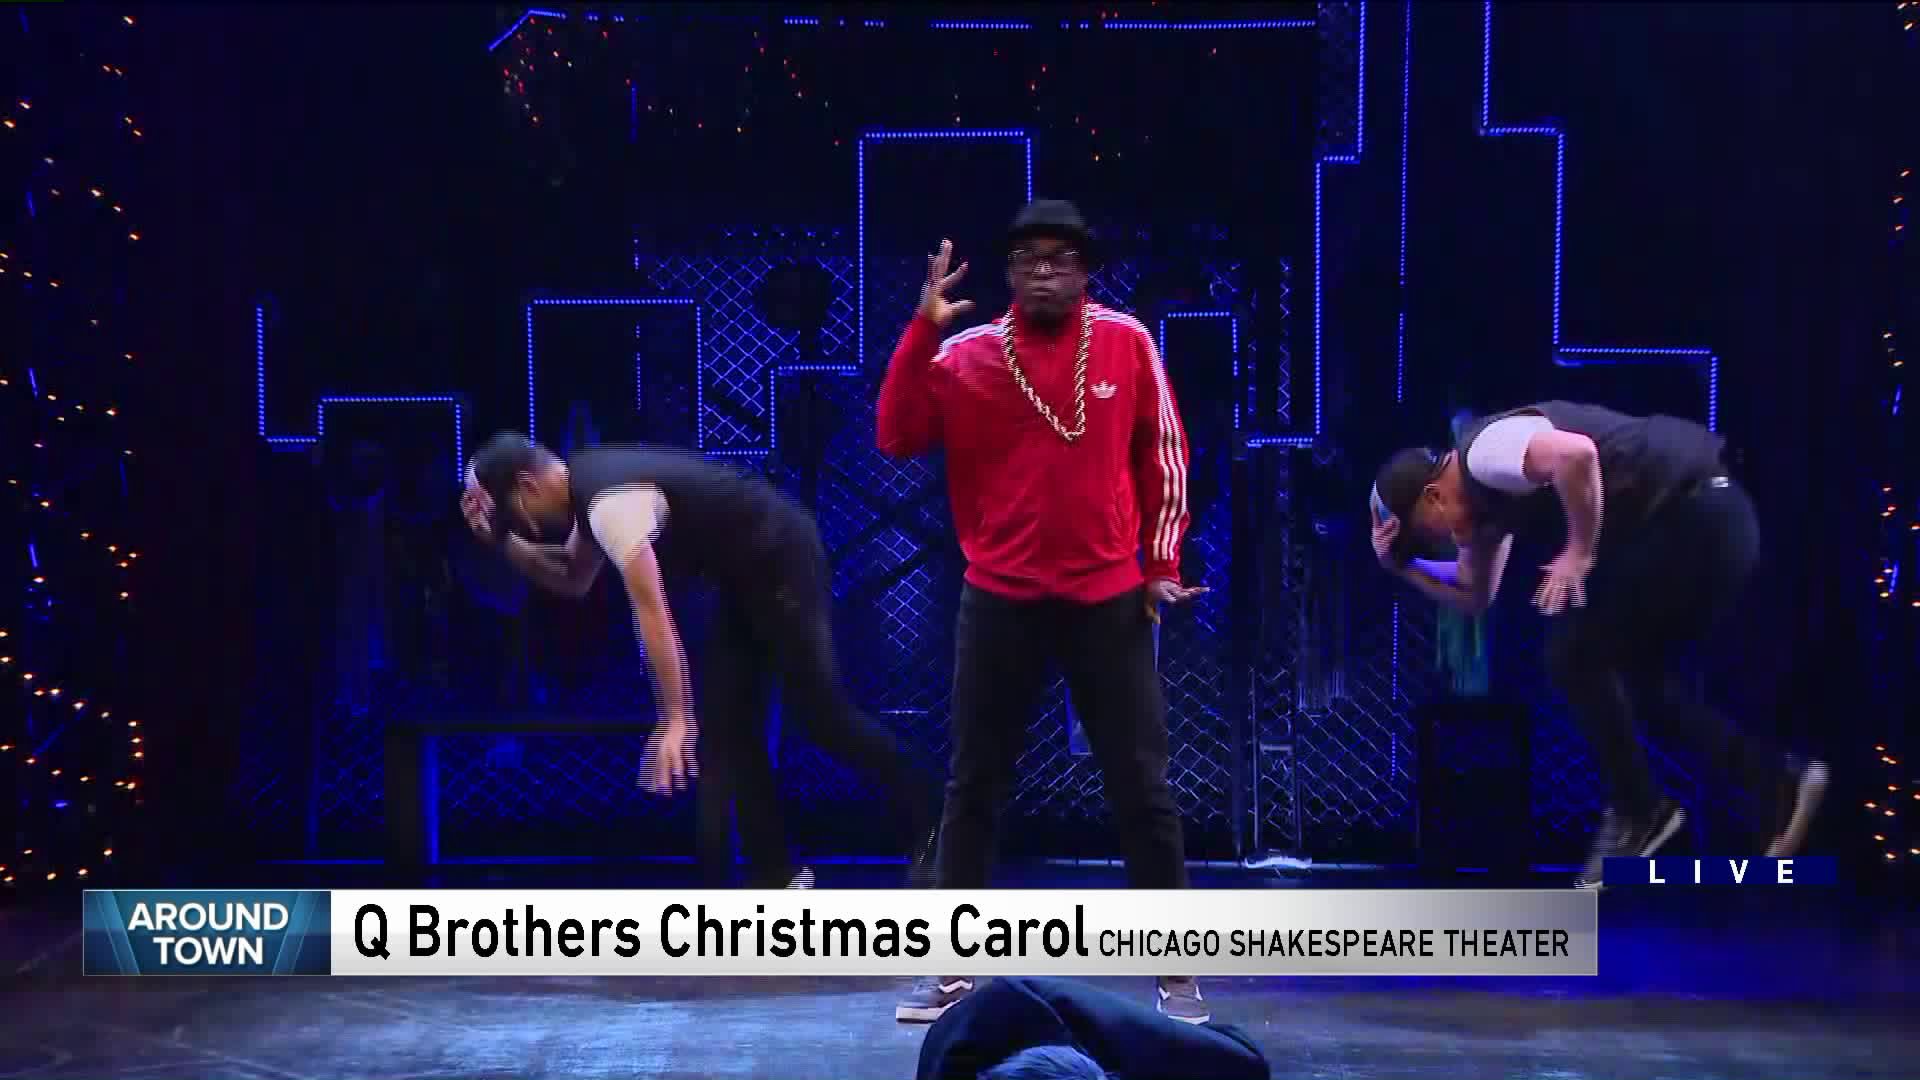 Around Town dances along with the Q Brothers Christmas Carol